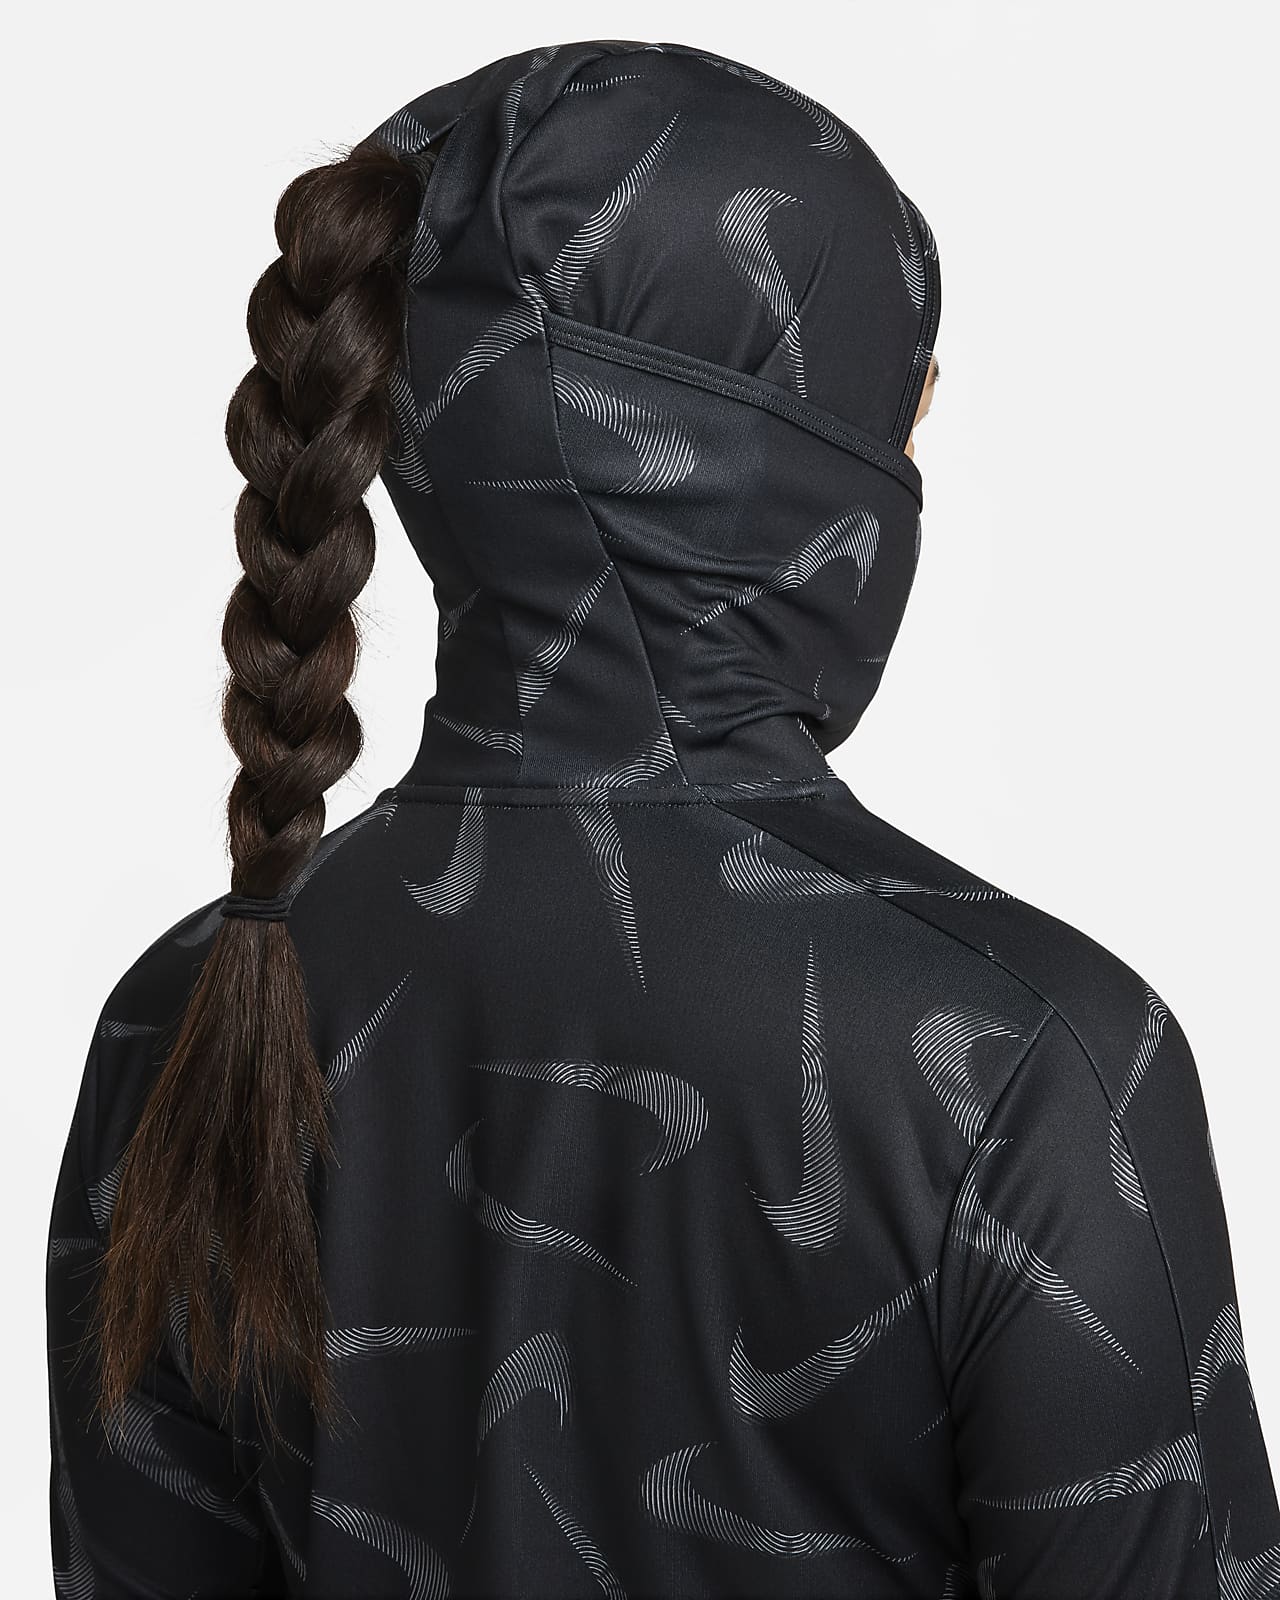 https://static.nike.com/a/images/t_PDP_1280_v1/f_auto,q_auto:eco/80379dc7-18c4-4c5d-803d-fa726e84ec6a/swoosh-hooded-printed-running-jacket-PXxDsF.png